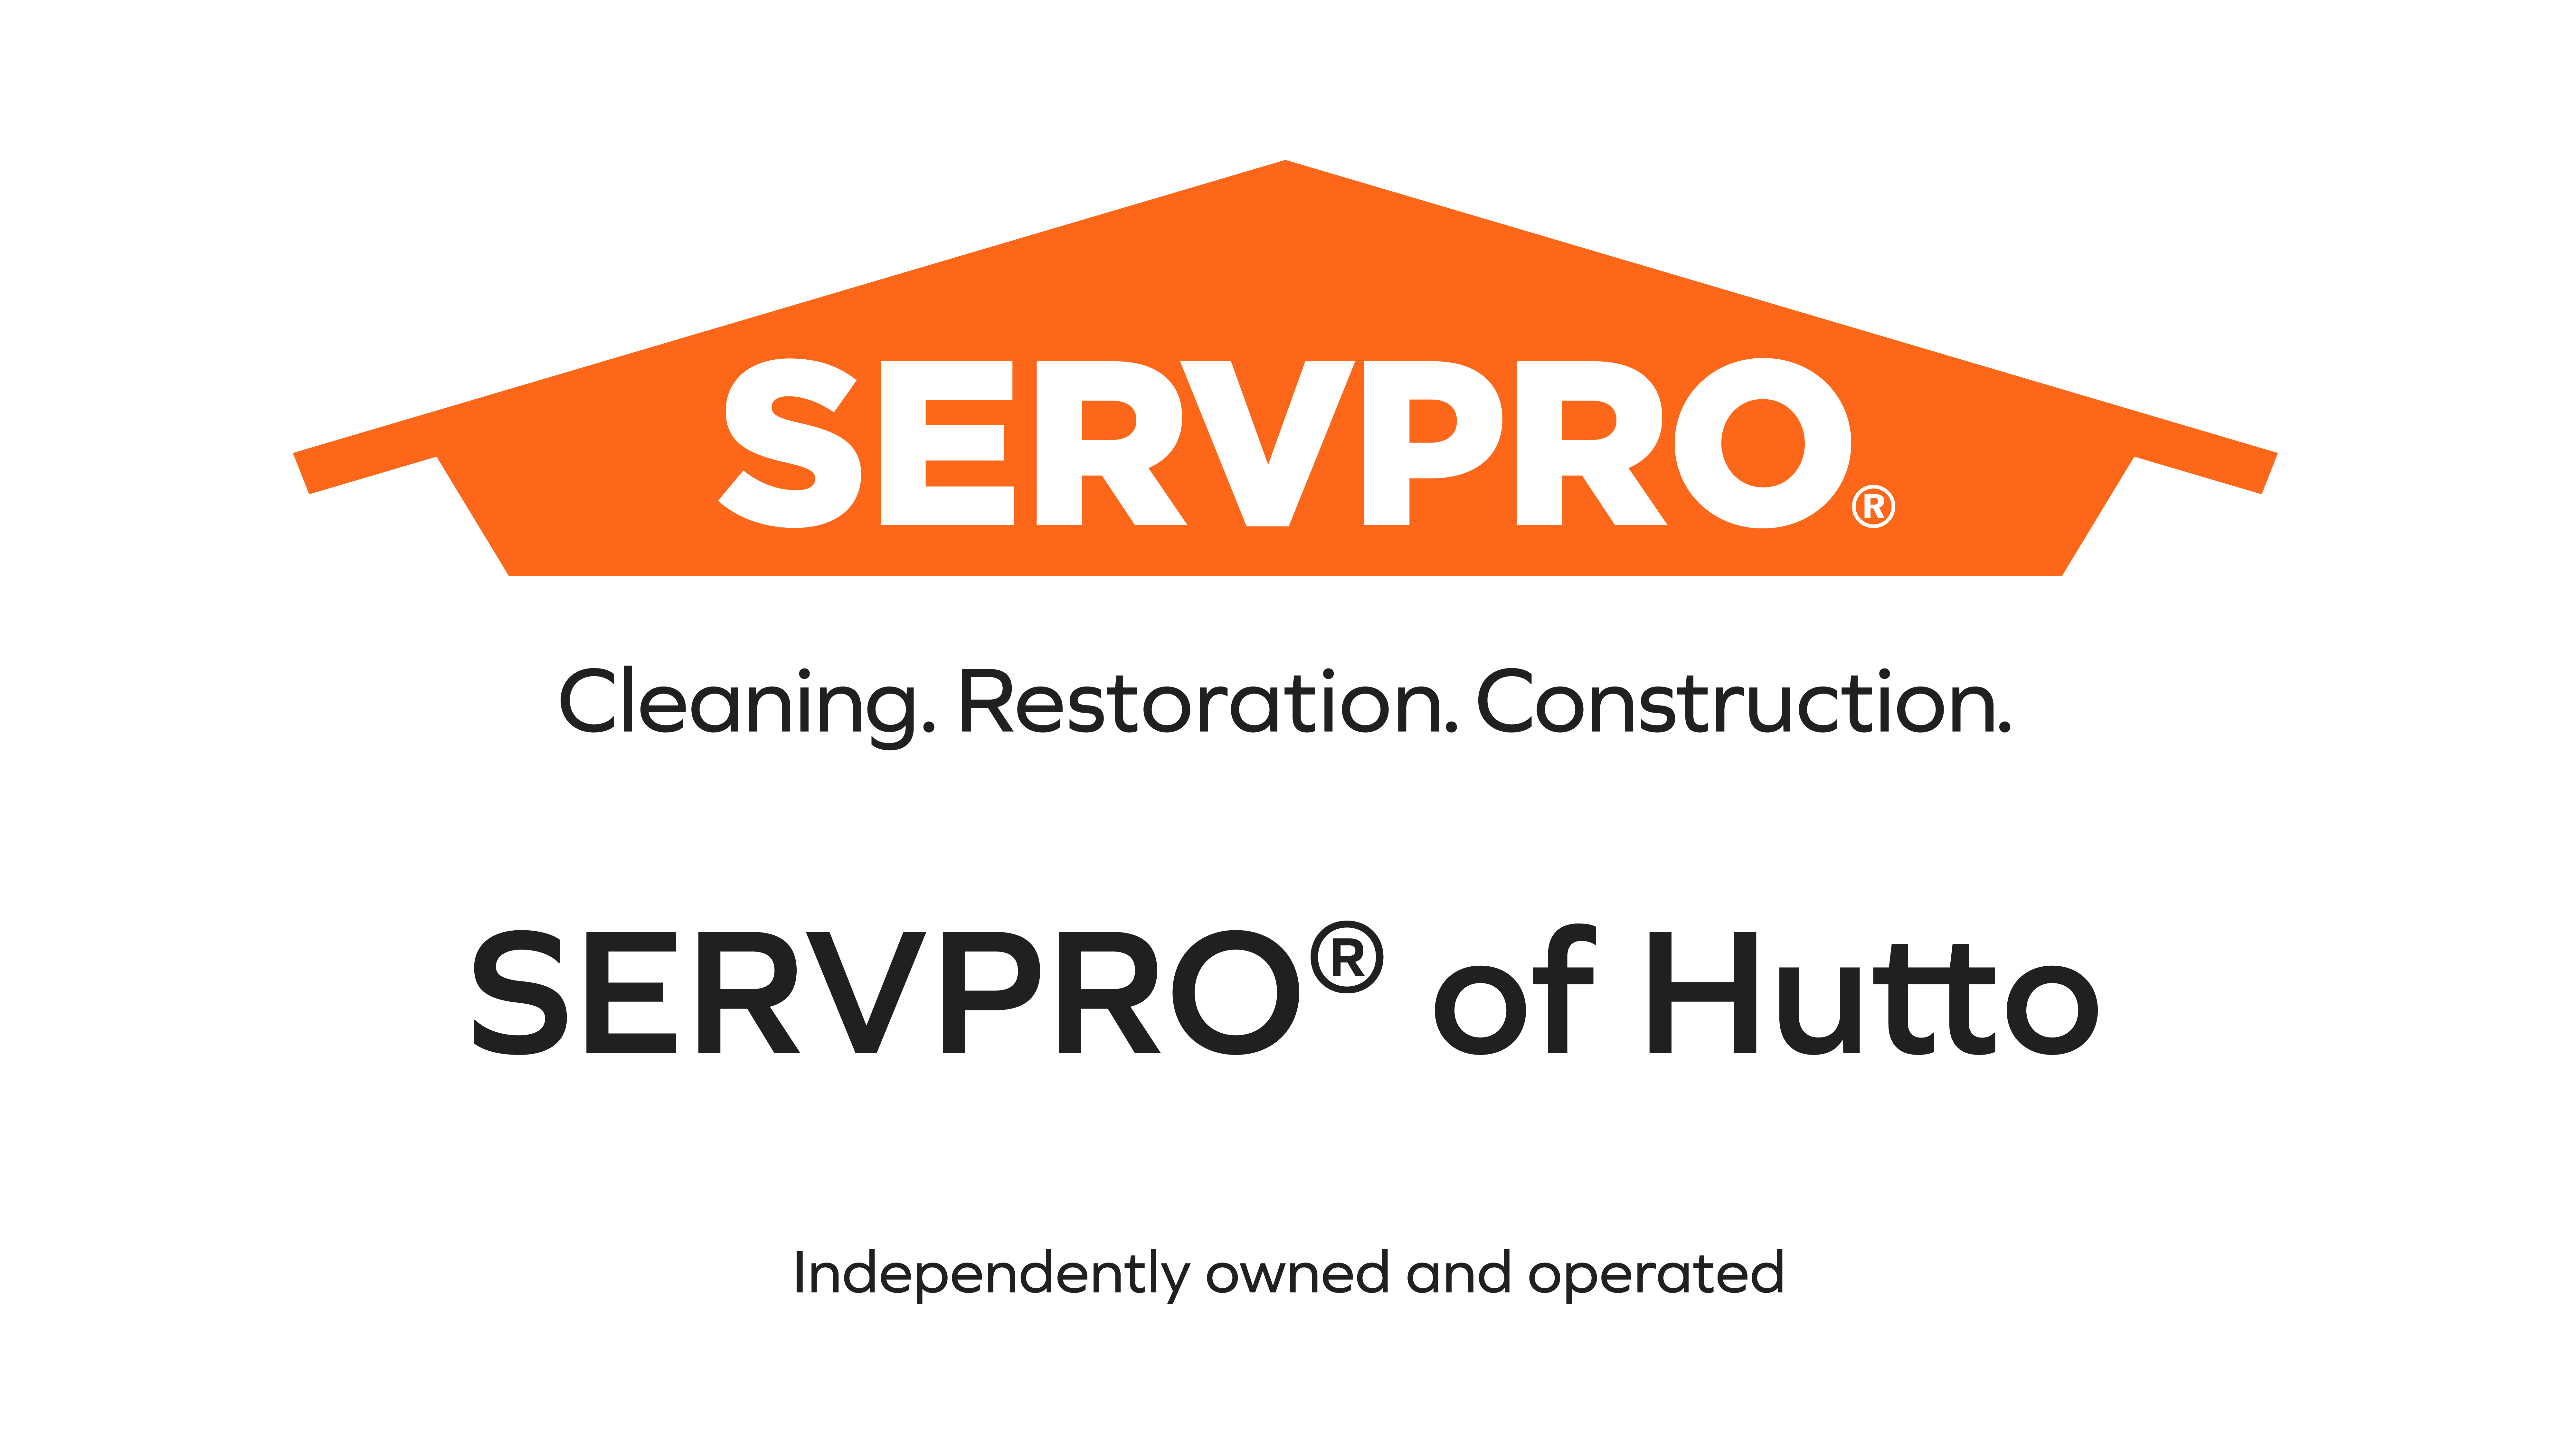 SERVPRO of Hutto